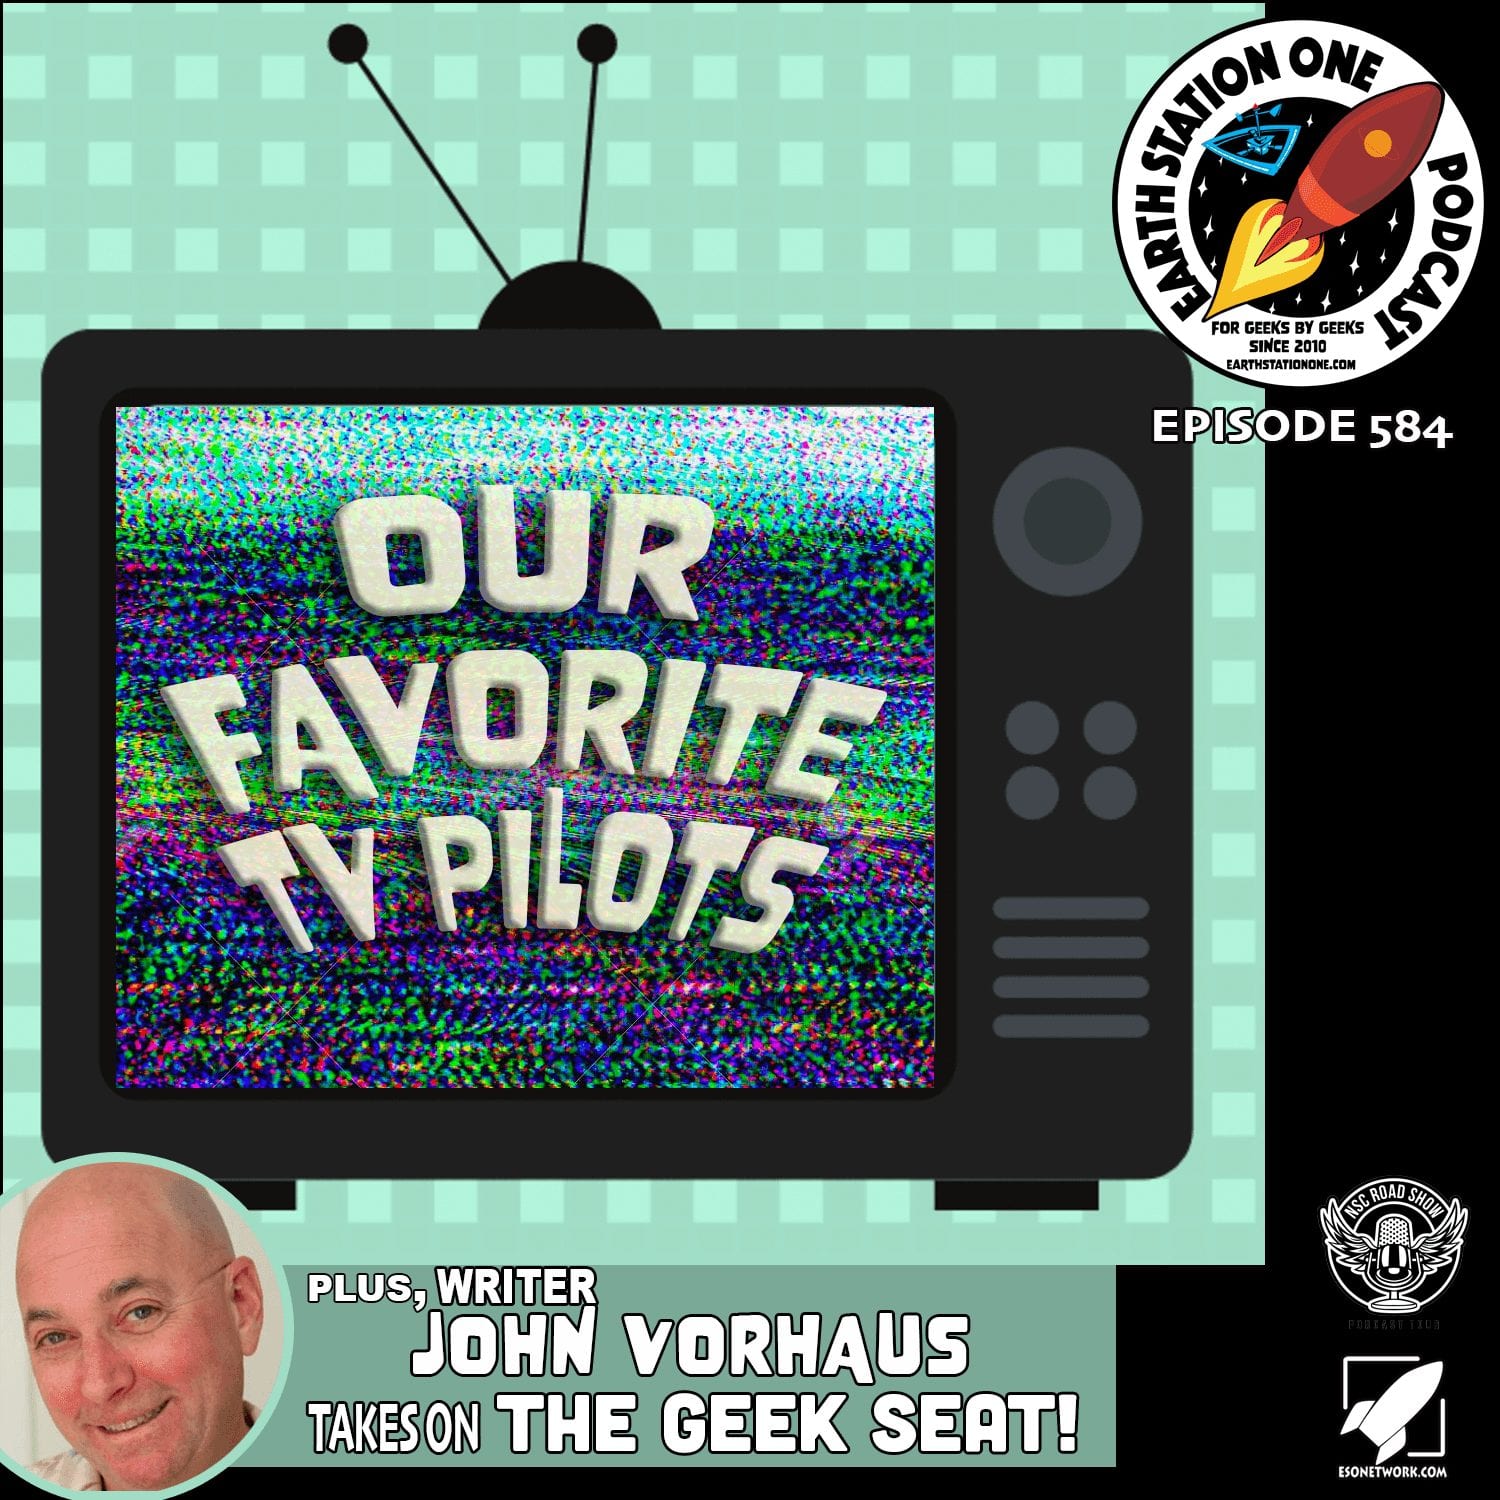 The ESO Network Ep 584 - Our Favorite TV Pilots